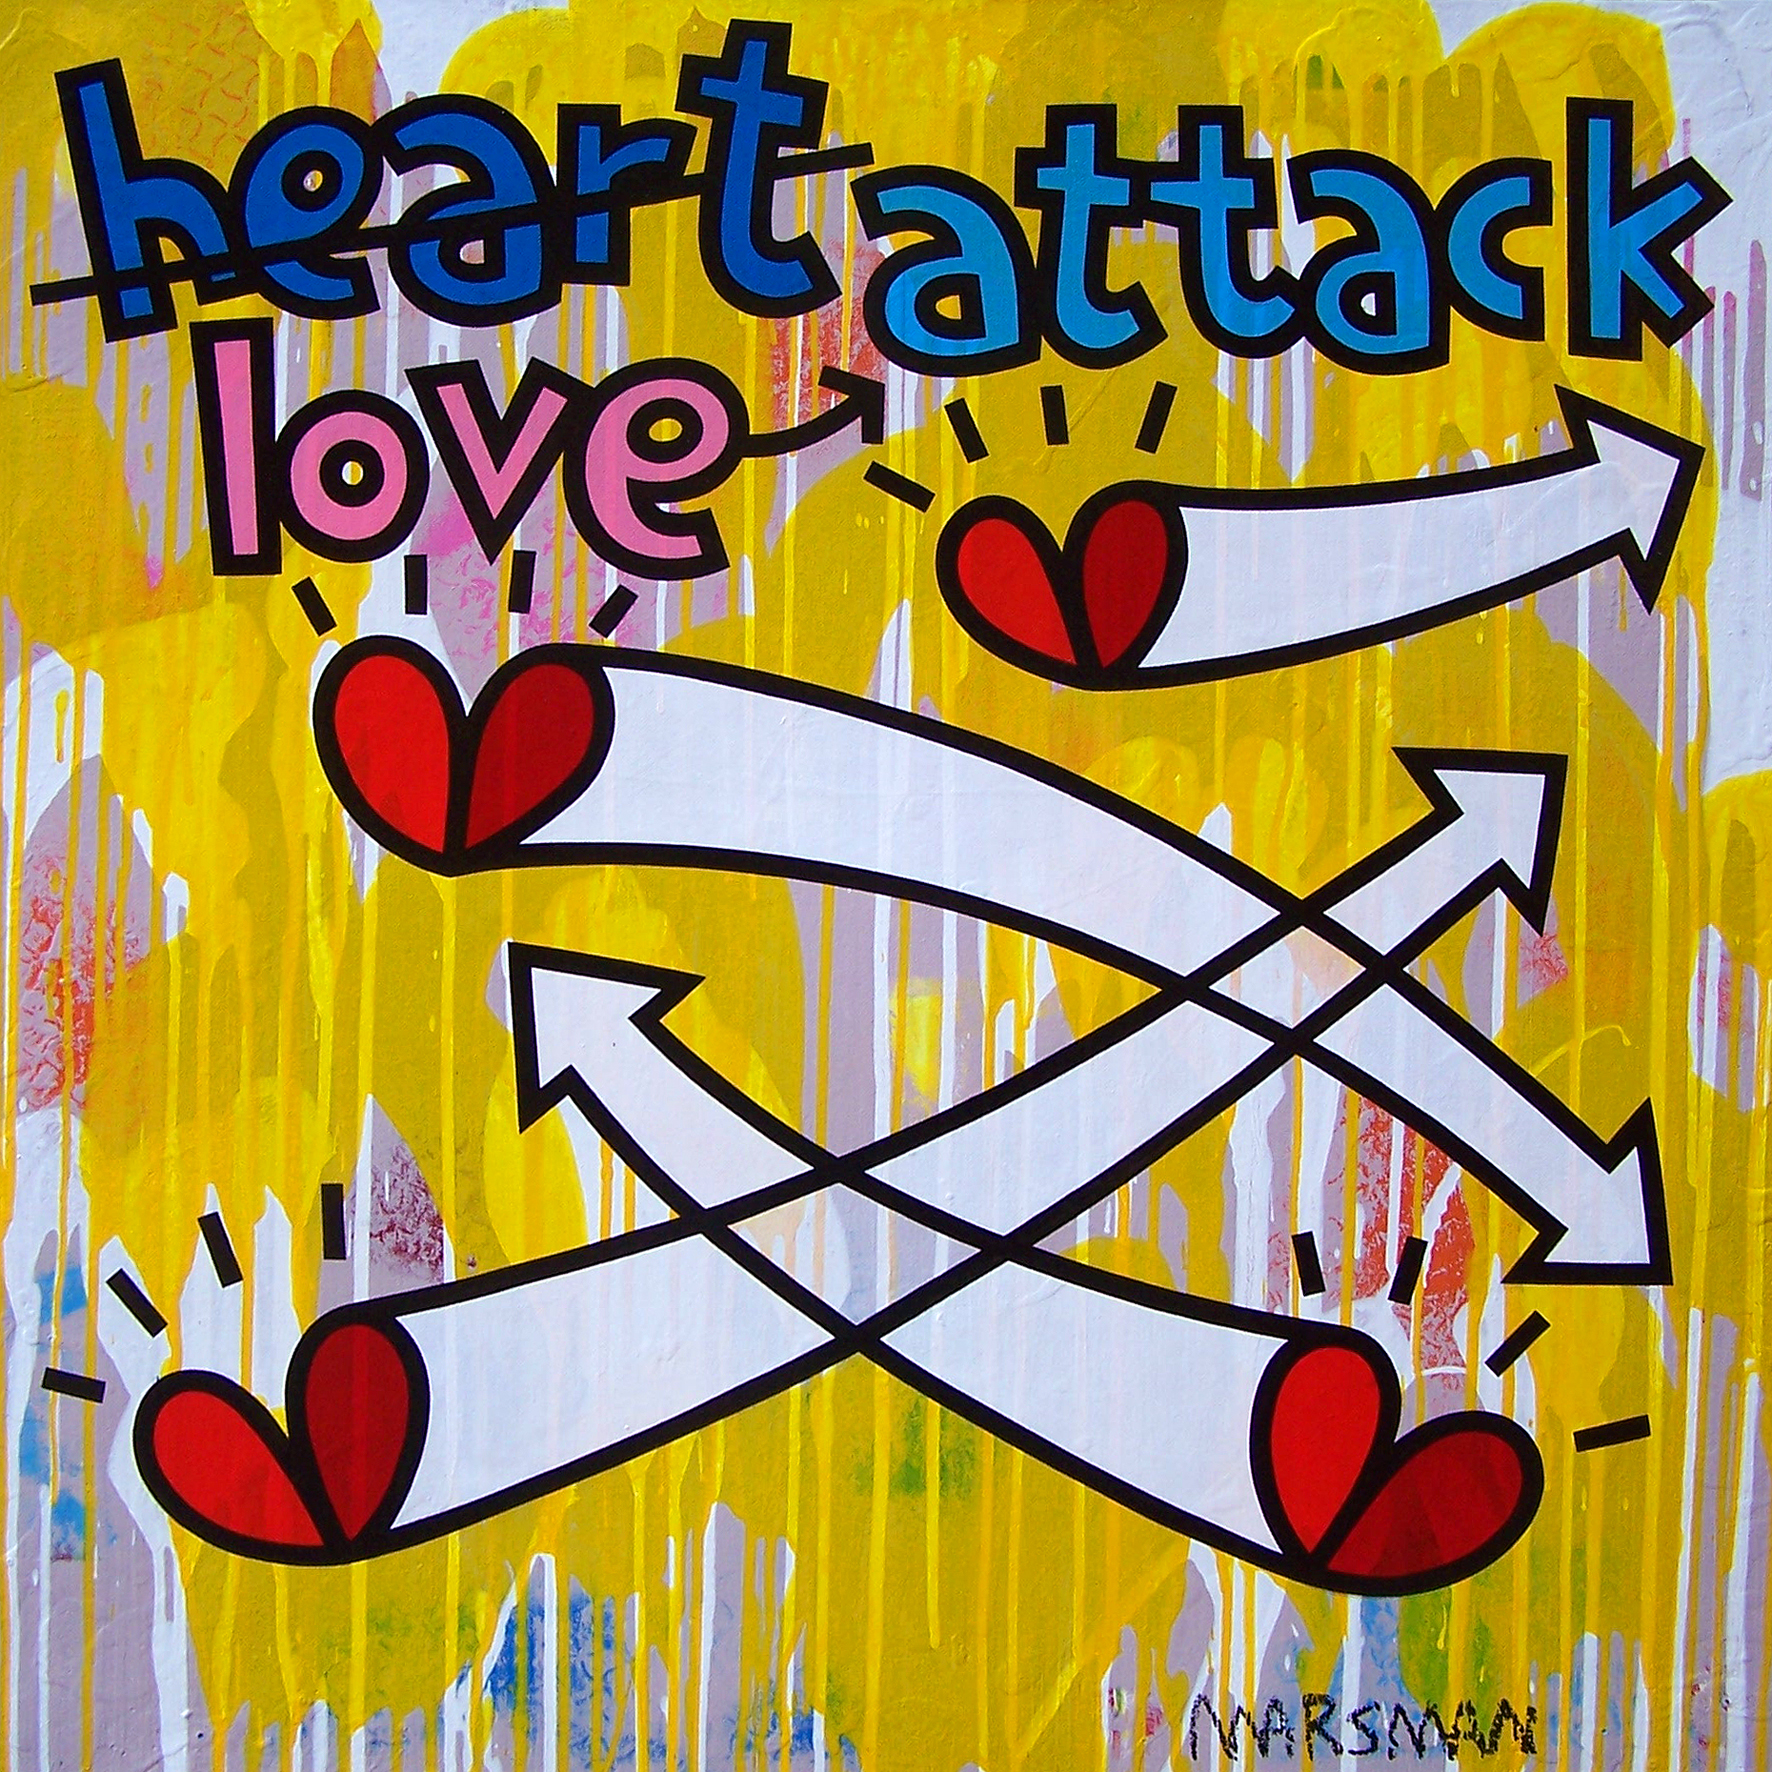 <b>LOVE ATTACK</b> - 100 x 100 cm - acrylic on canvas - SOLD  <a style="color: red; text-decoration: none" href="mailto:jpgpmarsman@onsbrabantnet.nl">BESTEL</a>